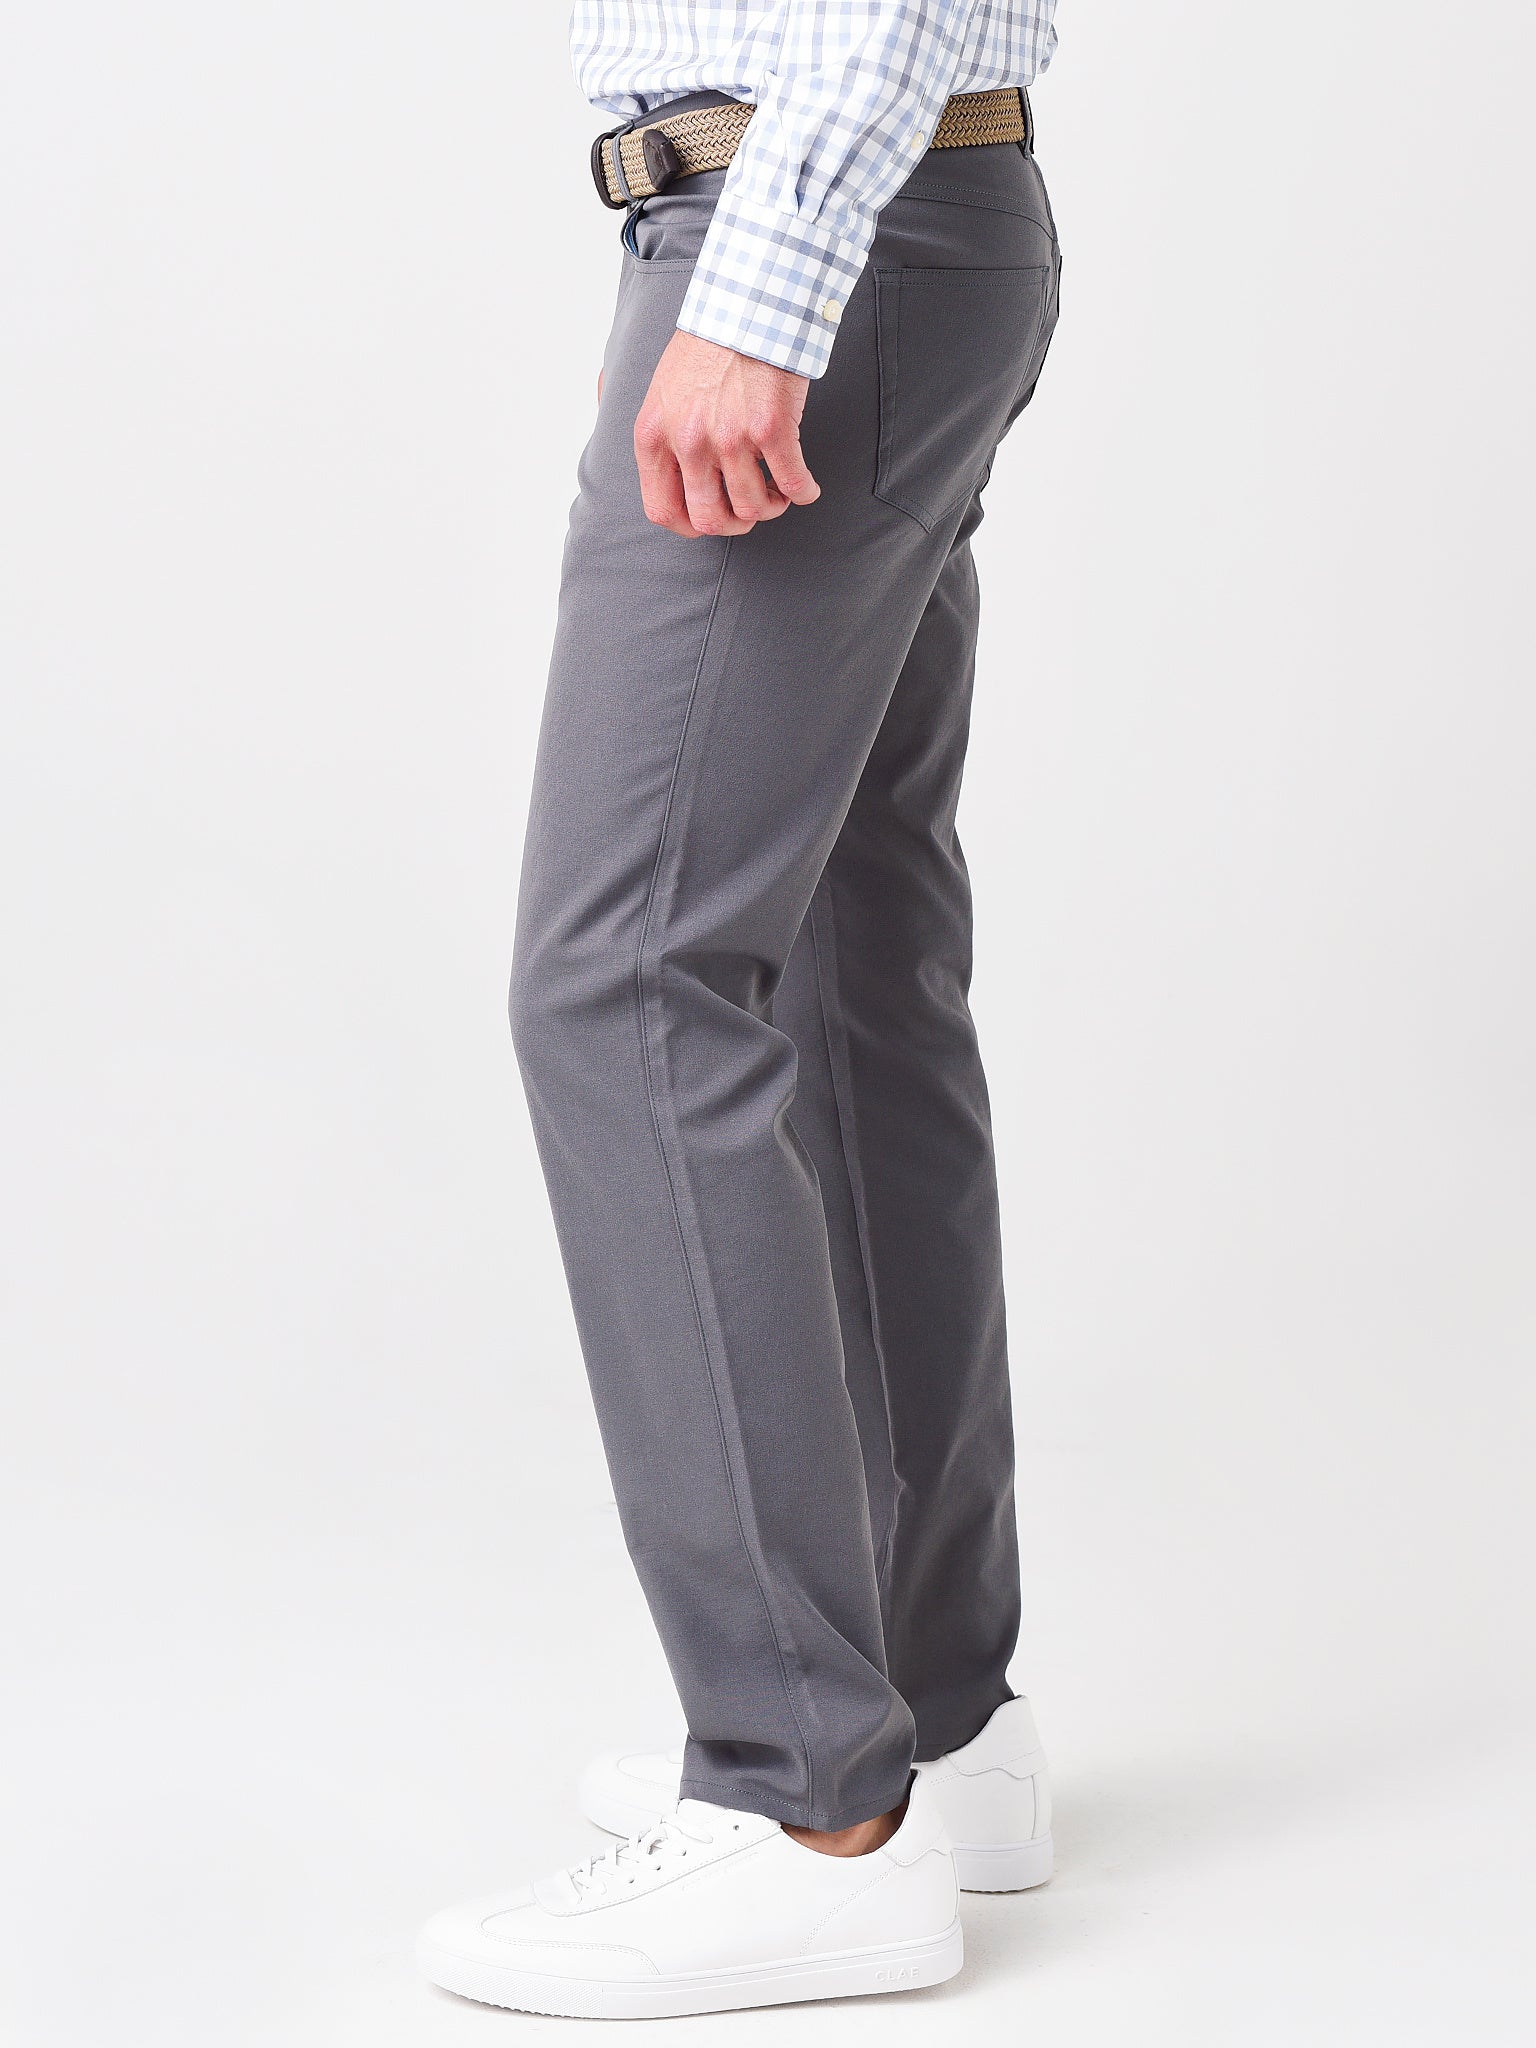 Peter Millar eb66 Performance Five-Pocket Pants in Gale Grey – Island Trends